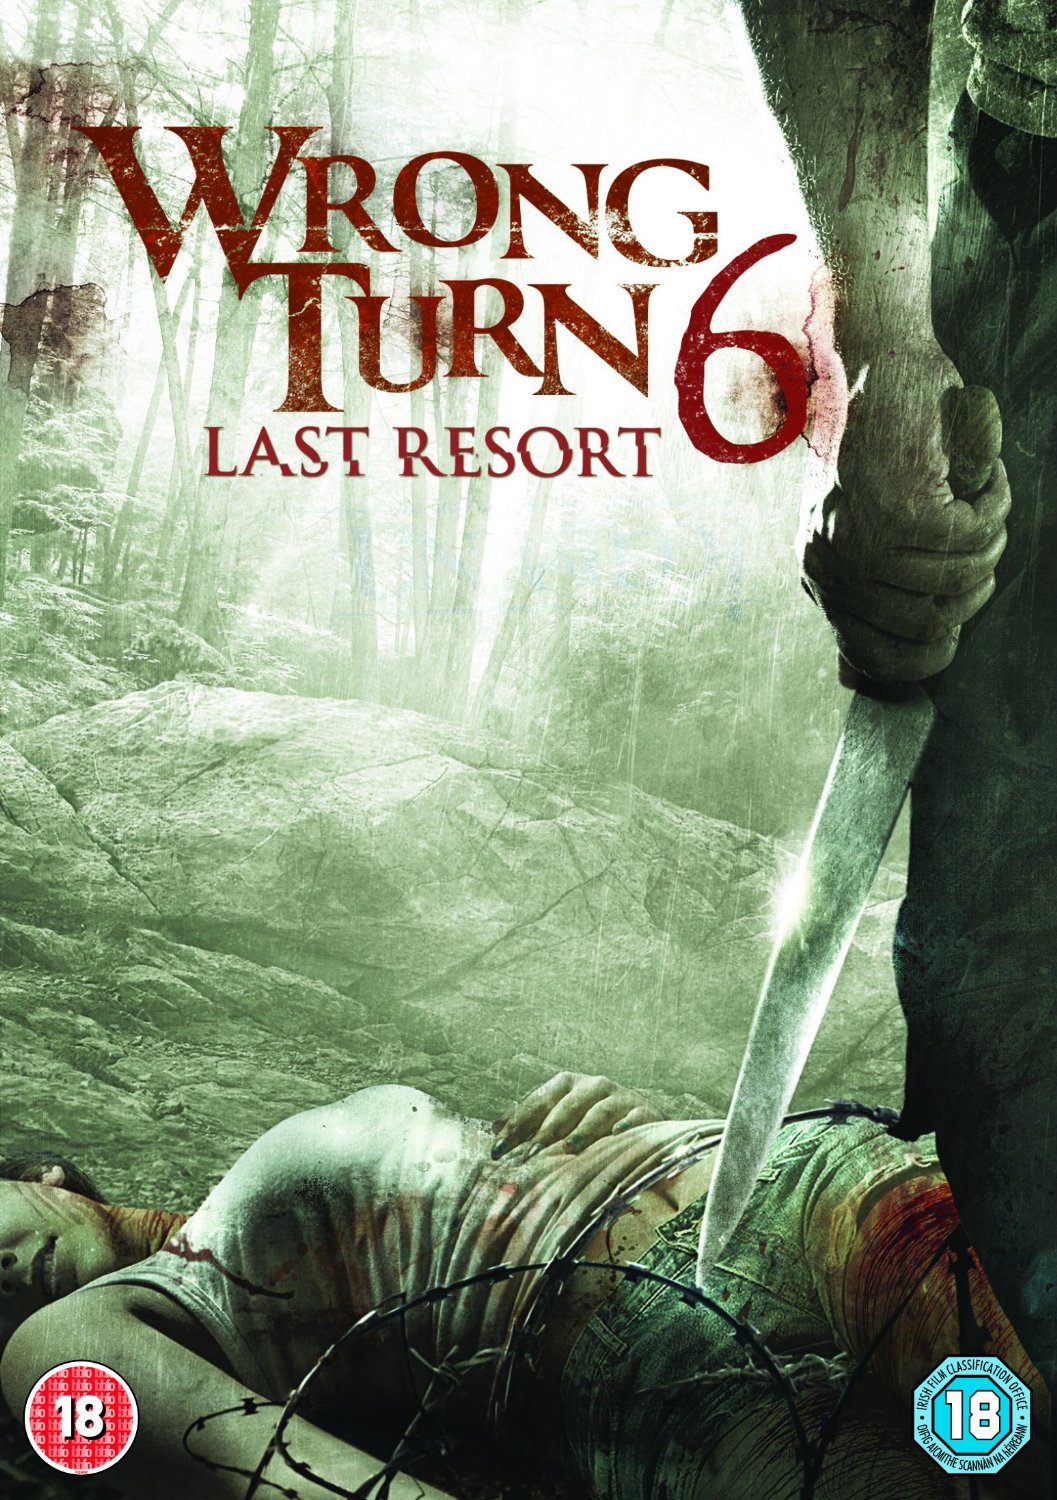 boom competitions - win a copy of Wrong Turn 6 on DVD